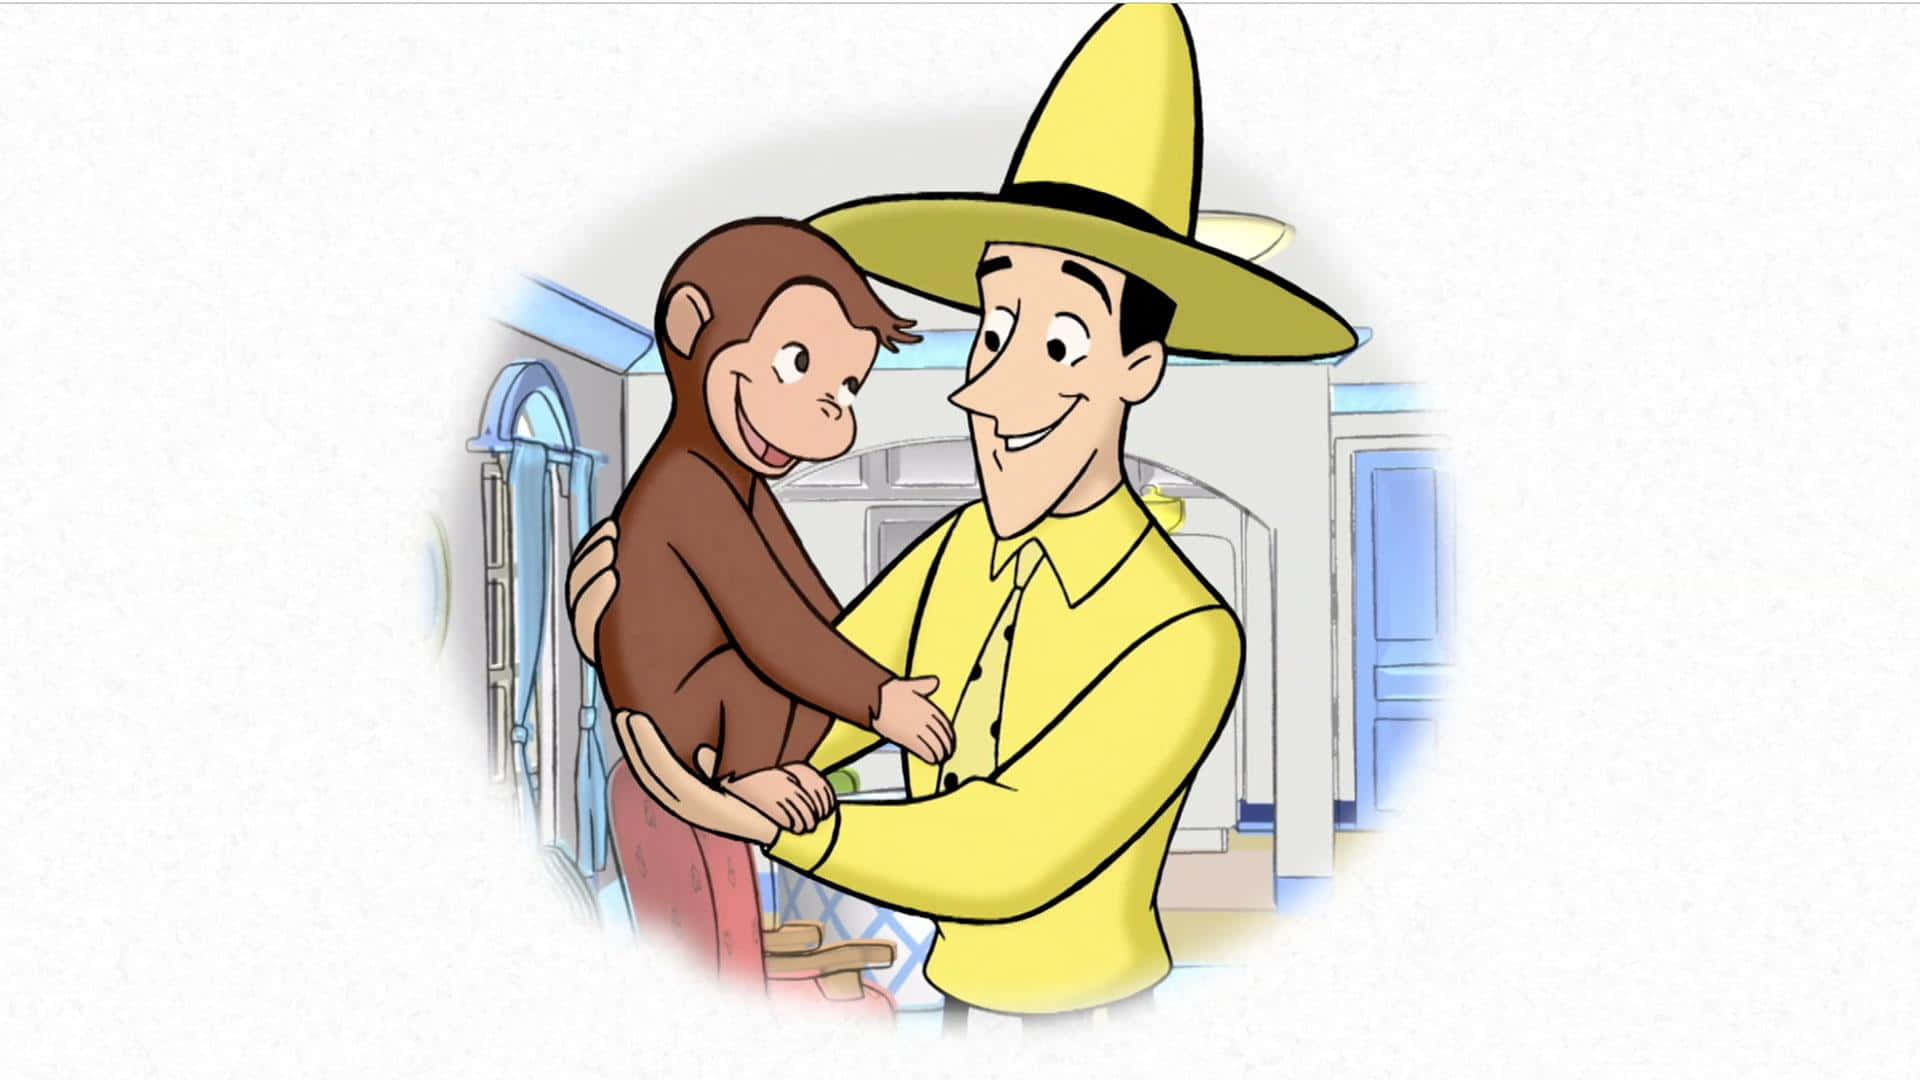 The mischievous Curious George